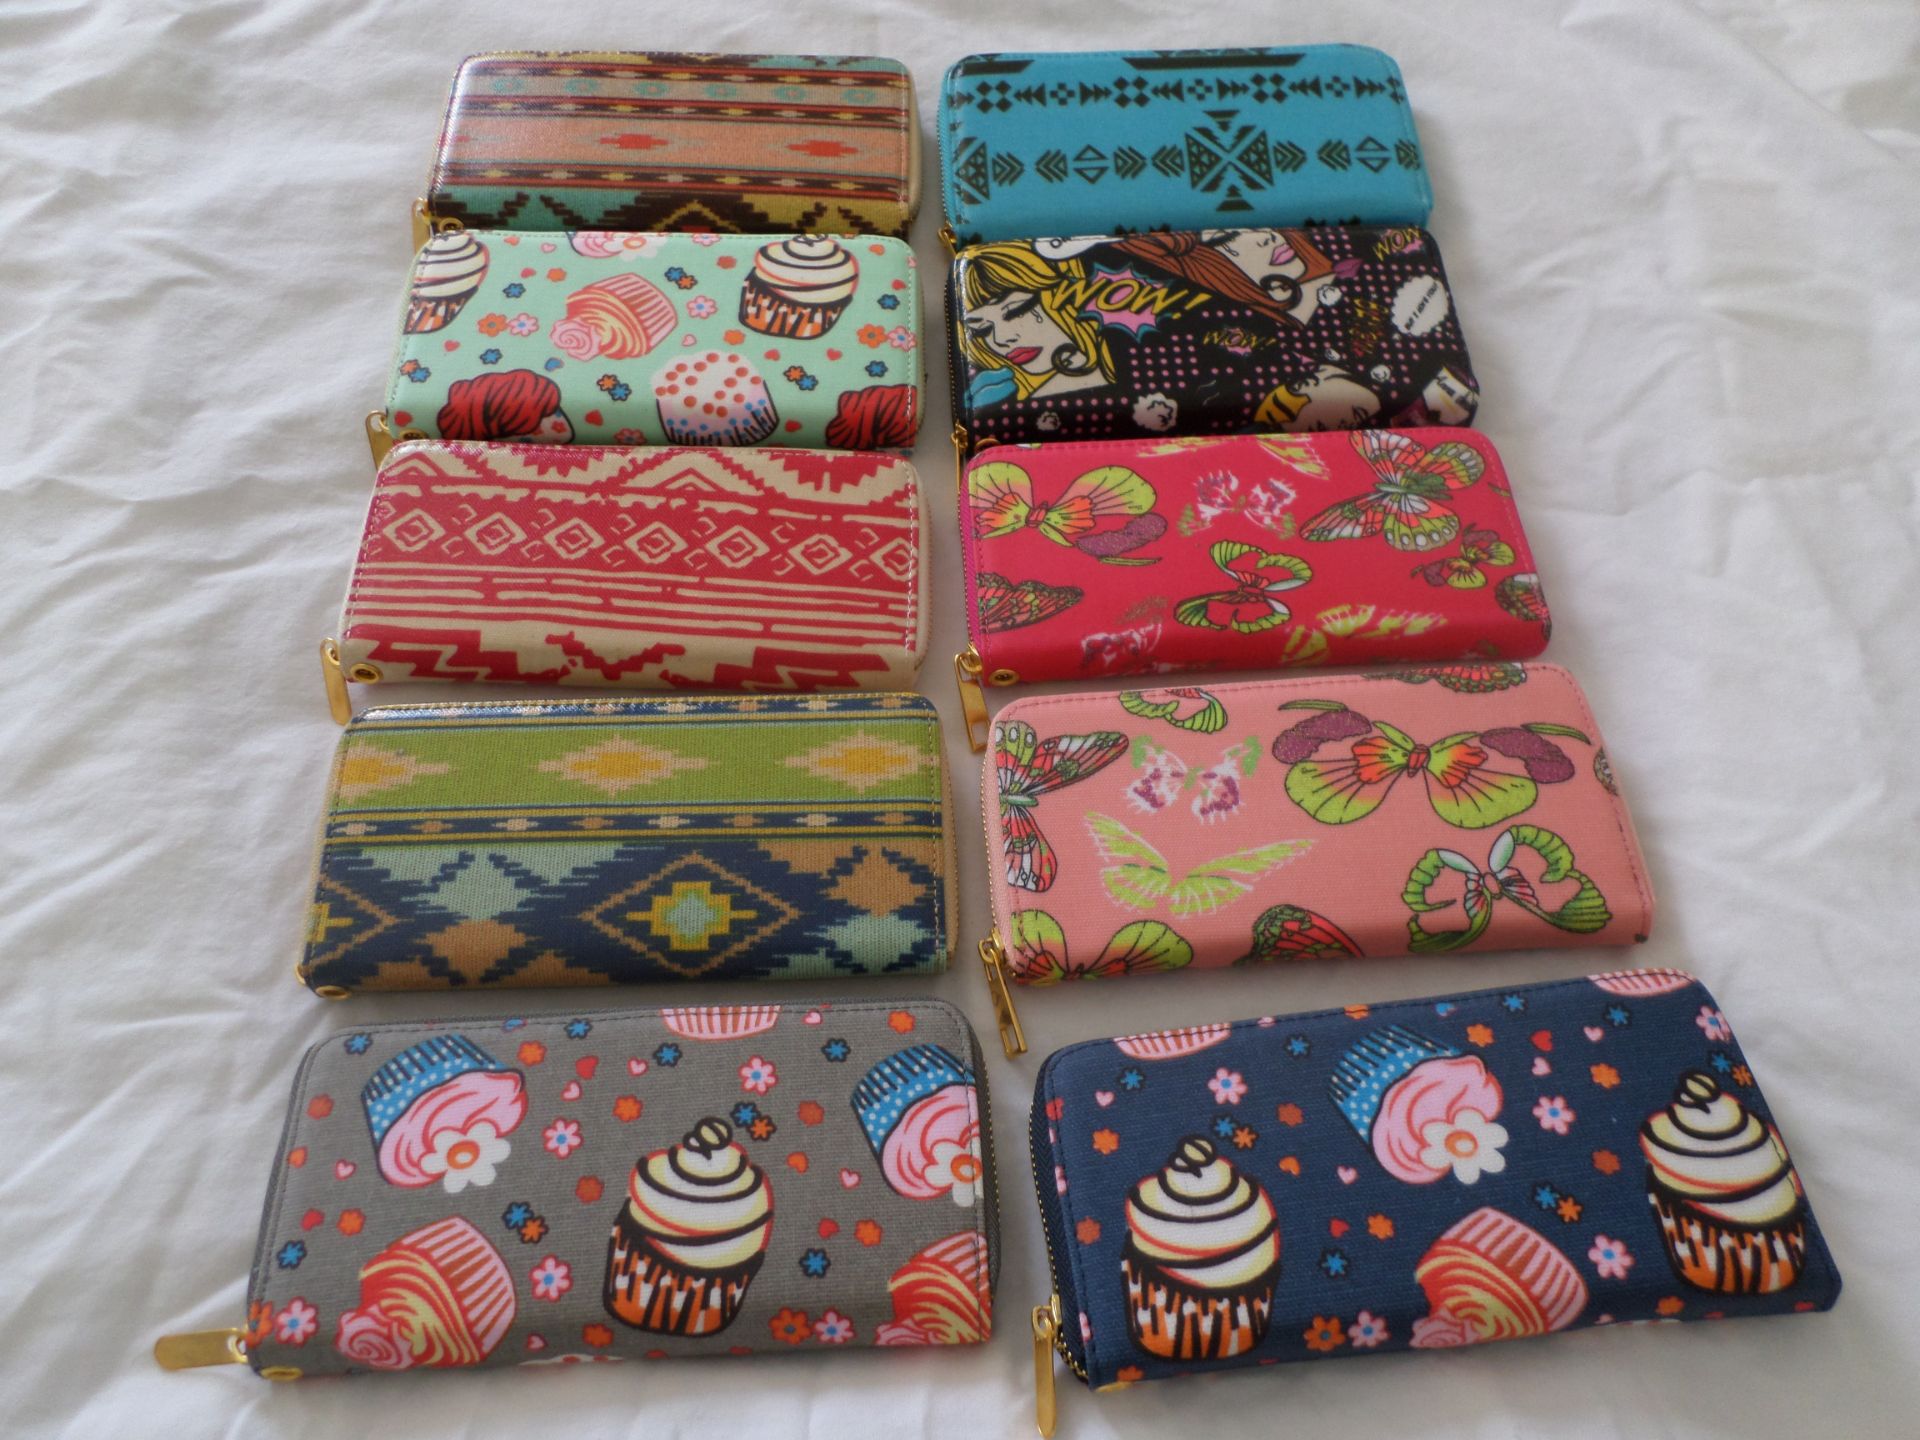 20 x Ladies Clutch/Purses RRP £14 Each. Brand New - Image 3 of 4